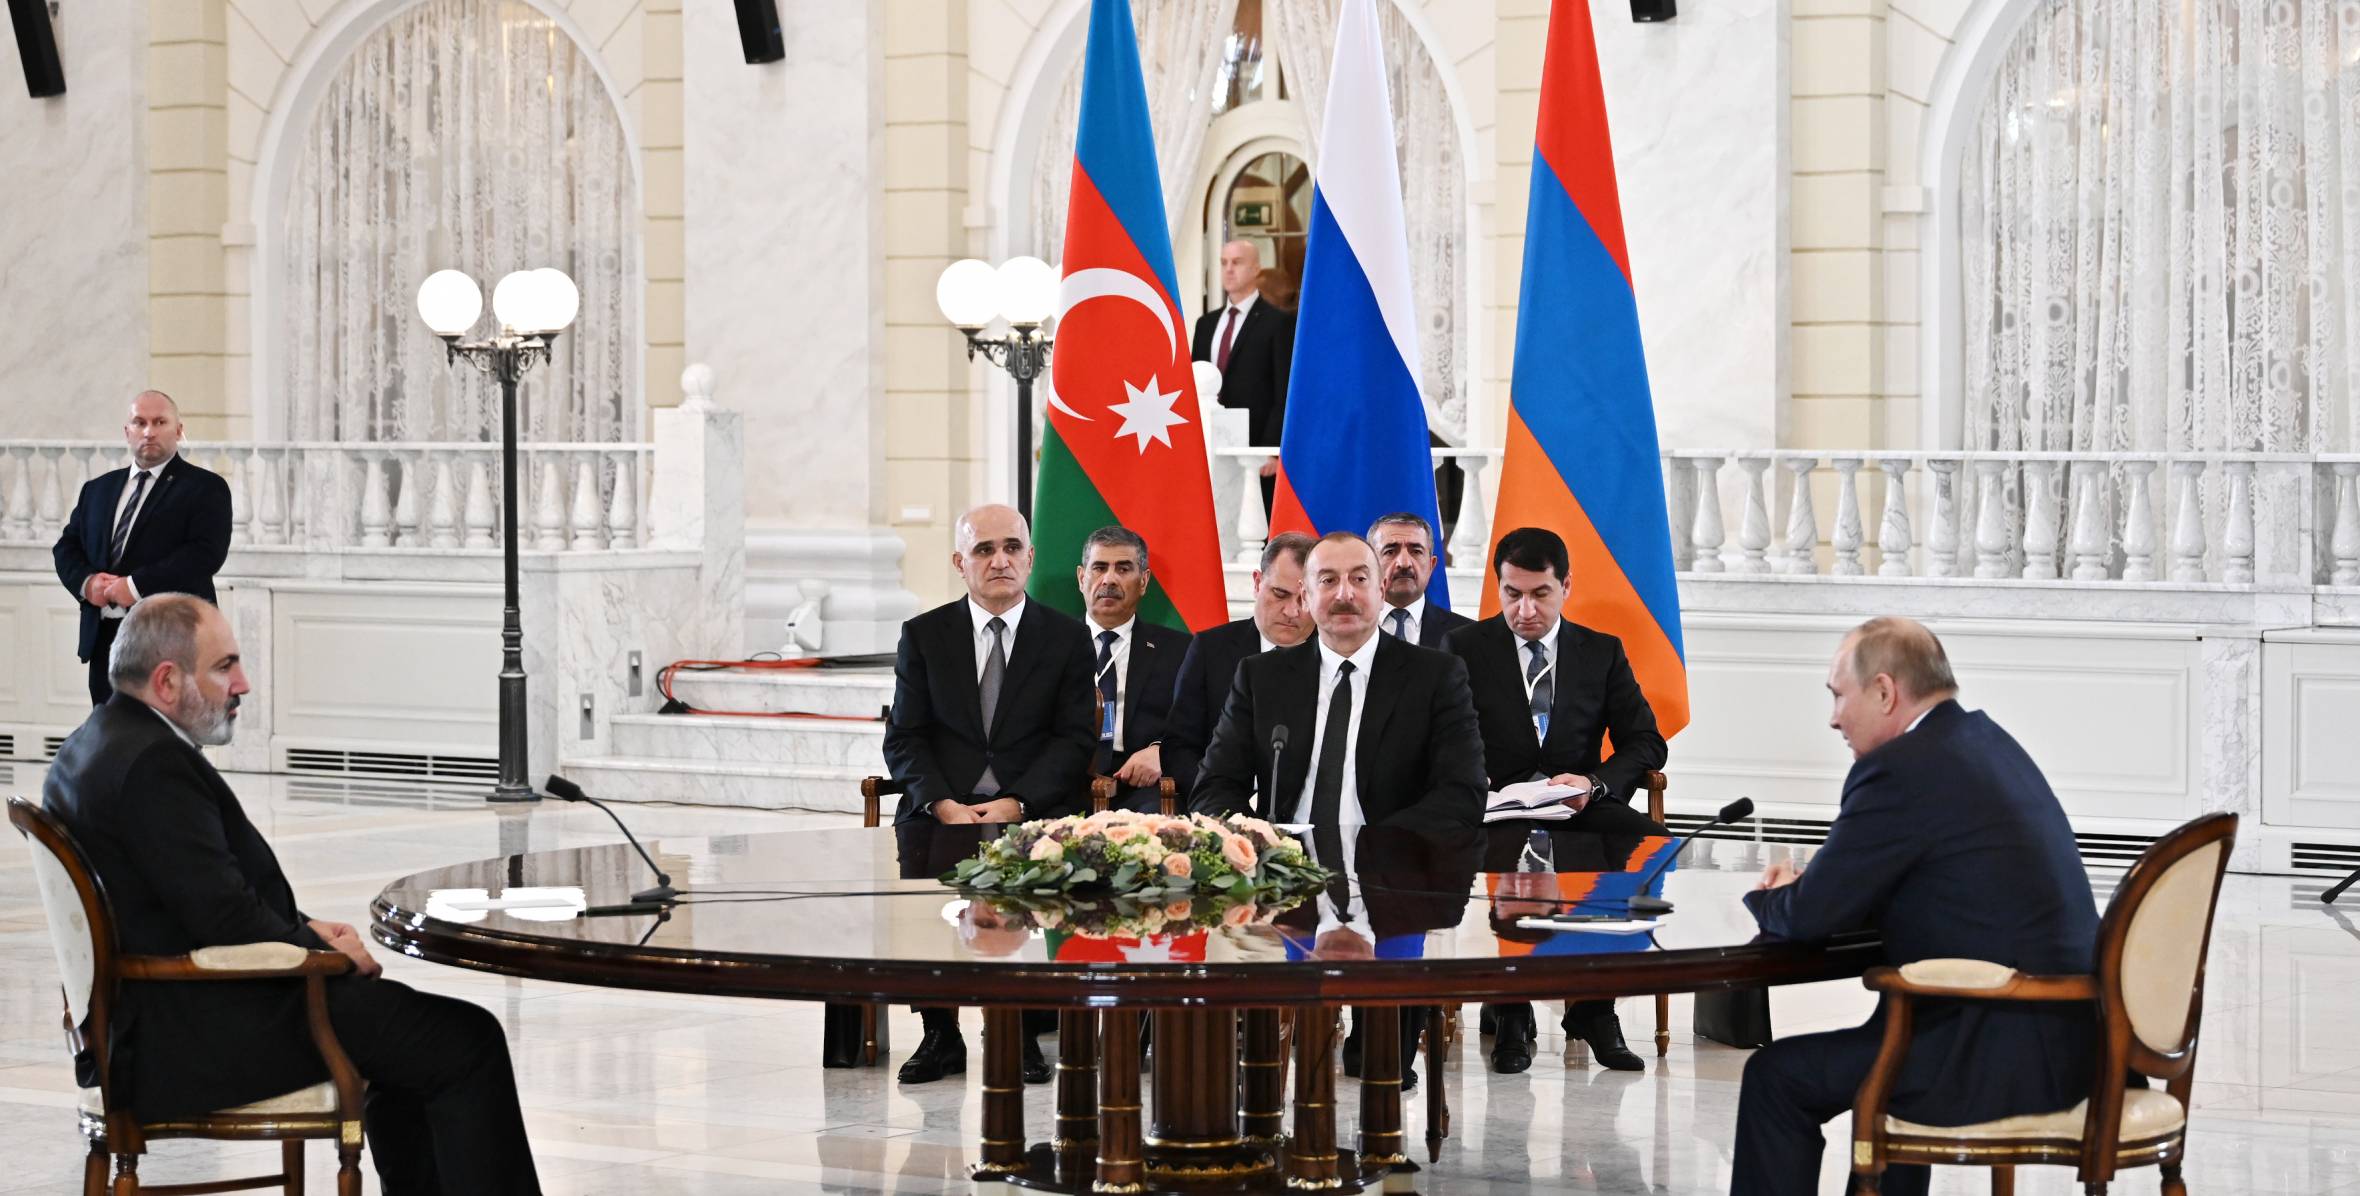 President of Azerbaijan met with President of Russia and Prime Minister of Armenia in Sochi